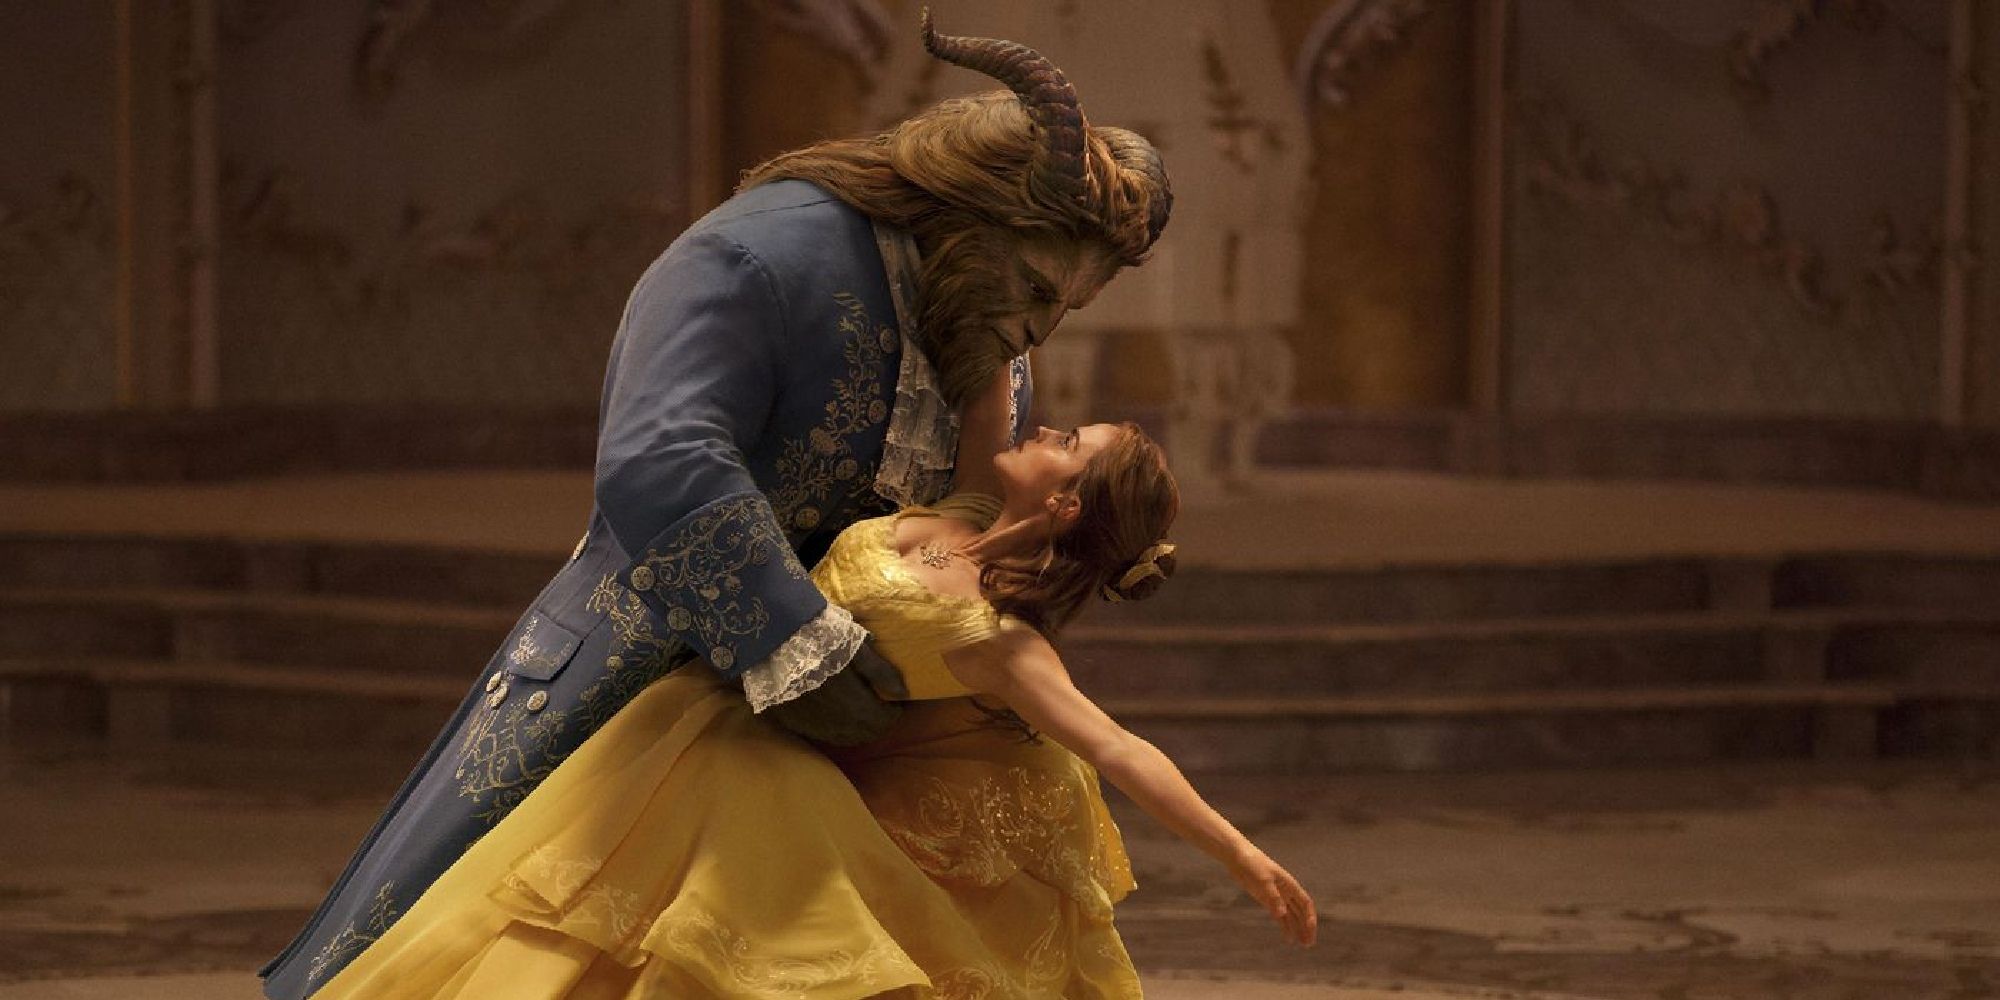 Beast and Belle dancing in Beauty and the Beast.